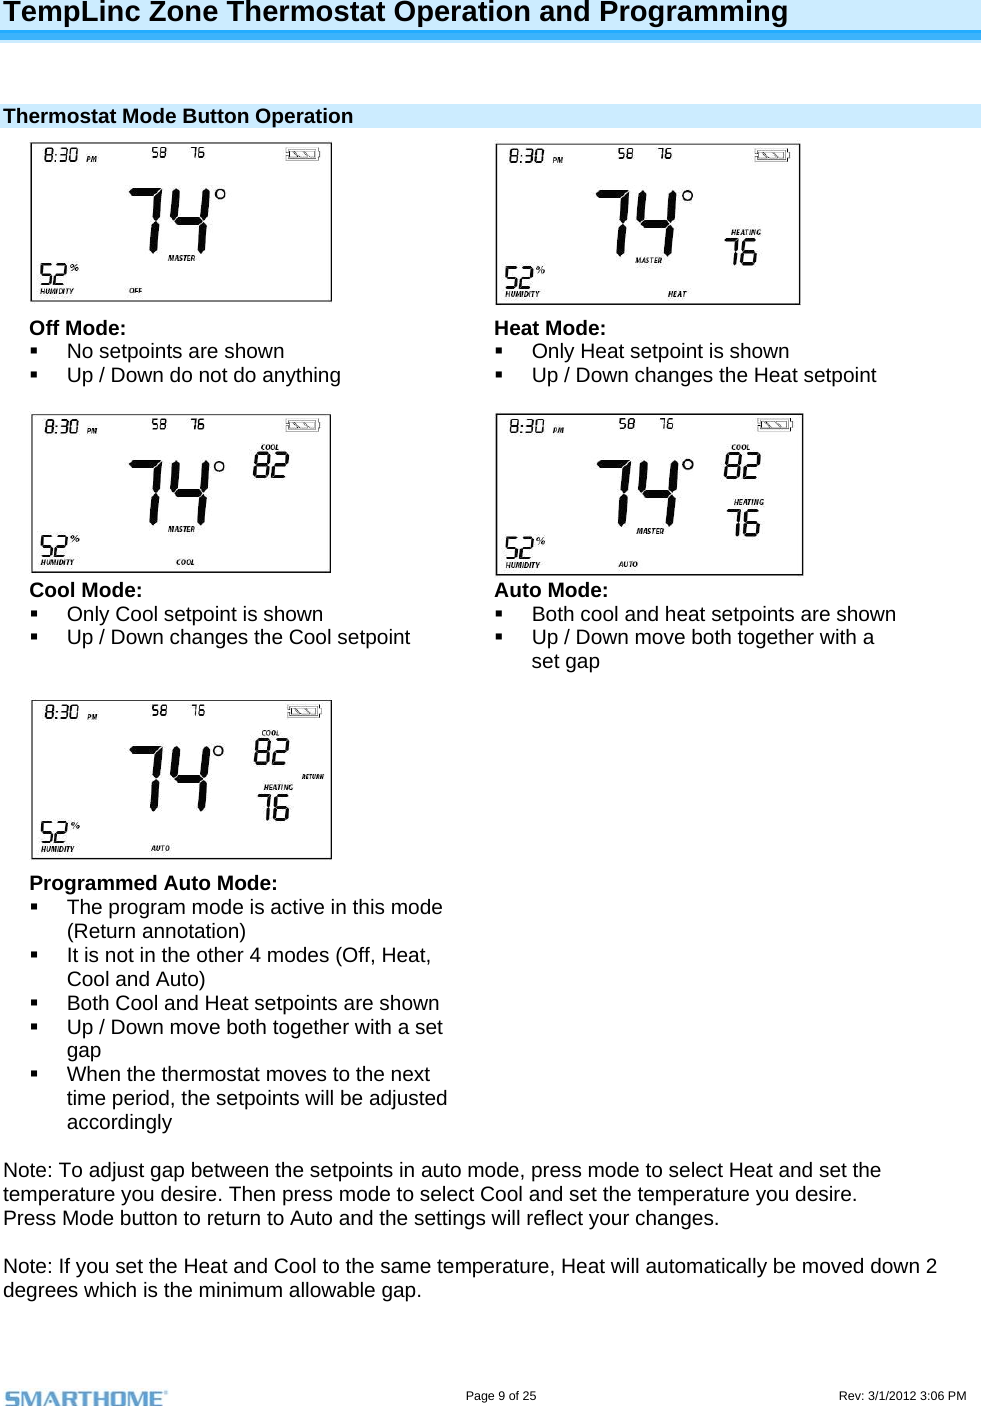                                                                                                                                   Page 9 of 25                                                                                       Rev: 3/1/2012 3:06 PM  TempLinc Zone Thermostat Operation and Programming   Thermostat Mode Button Operation   Off Mode:   No setpoints are shown   Up / Down do not do anything  Heat Mode:   Only Heat setpoint is shown   Up / Down changes the Heat setpoint    Cool Mode:   Only Cool setpoint is shown   Up / Down changes the Cool setpoint  Auto Mode:   Both cool and heat setpoints are shown   Up / Down move both together with a set gap    Programmed Auto Mode:   The program mode is active in this mode (Return annotation)   It is not in the other 4 modes (Off, Heat, Cool and Auto)   Both Cool and Heat setpoints are shown   Up / Down move both together with a set gap   When the thermostat moves to the next time period, the setpoints will be adjusted accordingly   Note: To adjust gap between the setpoints in auto mode, press mode to select Heat and set the temperature you desire. Then press mode to select Cool and set the temperature you desire.  Press Mode button to return to Auto and the settings will reflect your changes.   Note: If you set the Heat and Cool to the same temperature, Heat will automatically be moved down 2 degrees which is the minimum allowable gap. 